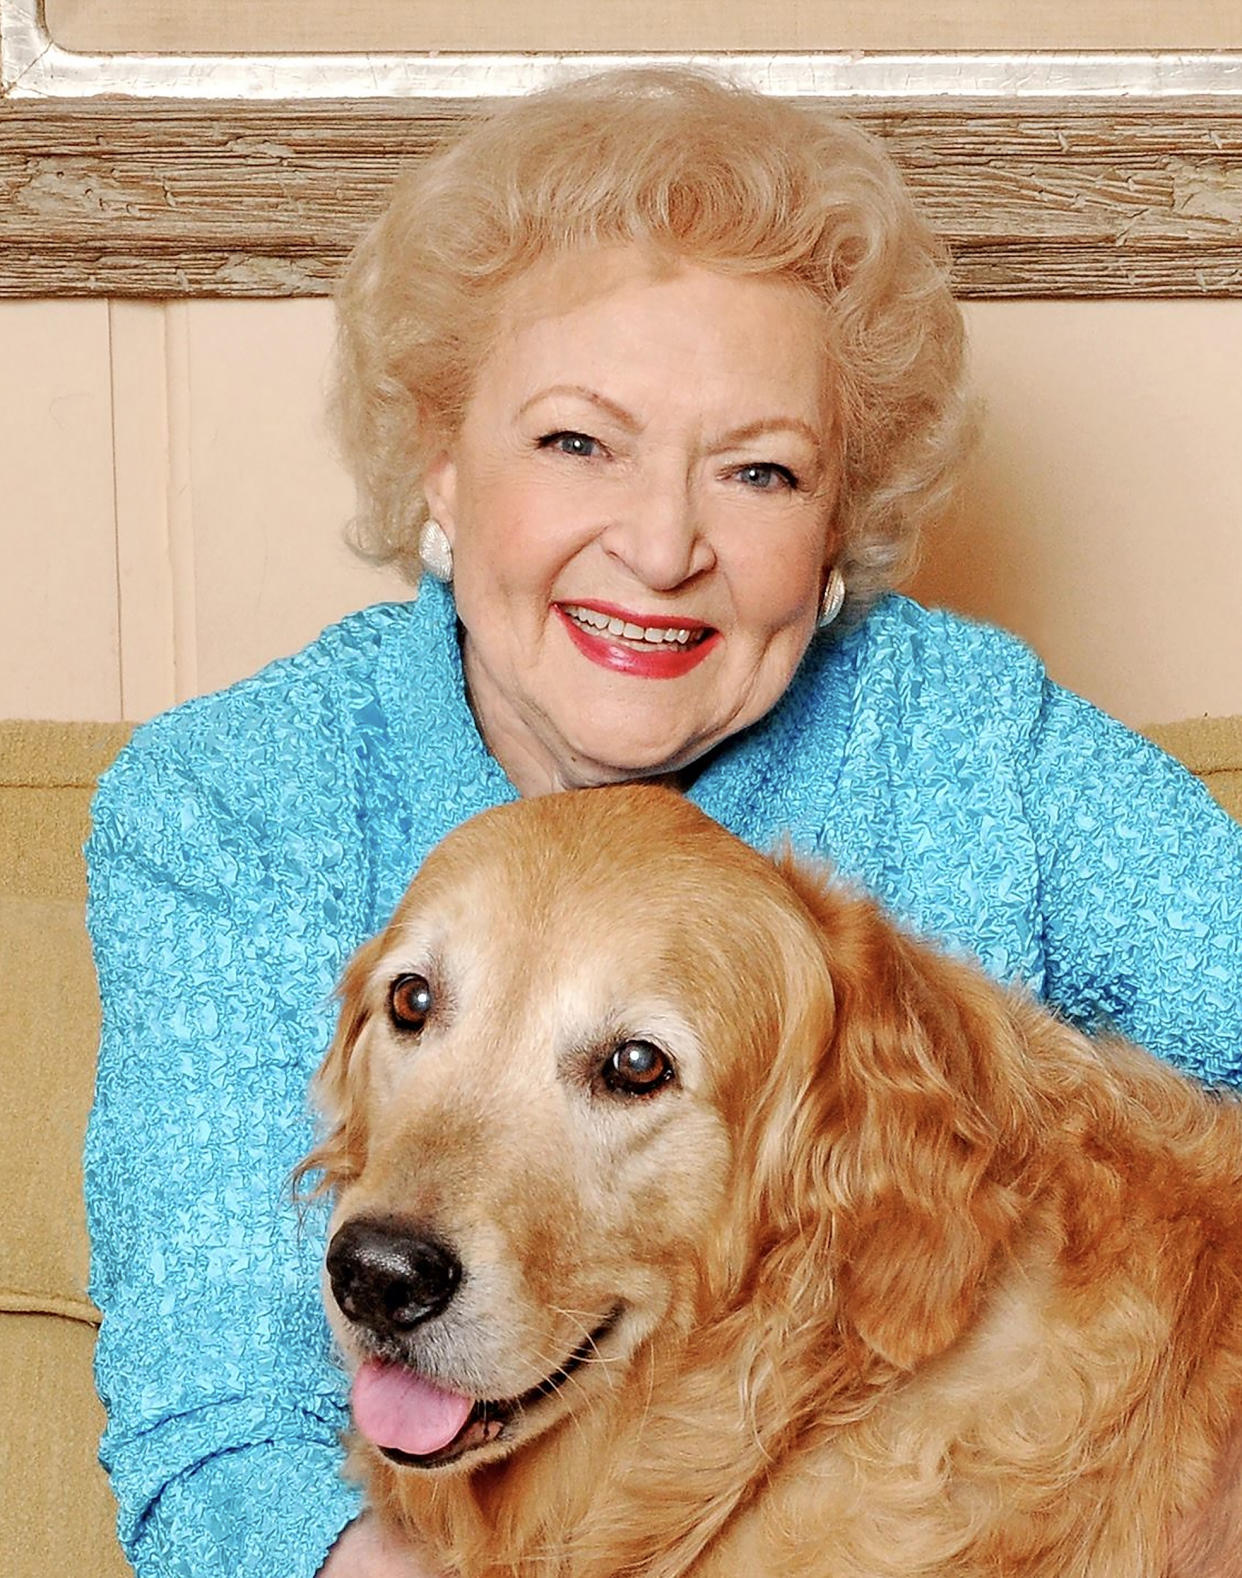 Betty White hugs Pontiac, a golden retriever she acquired from Guide Dogs for the Blind in 2005. (Courtesy Betty White / Guide Dogs for the Blind)